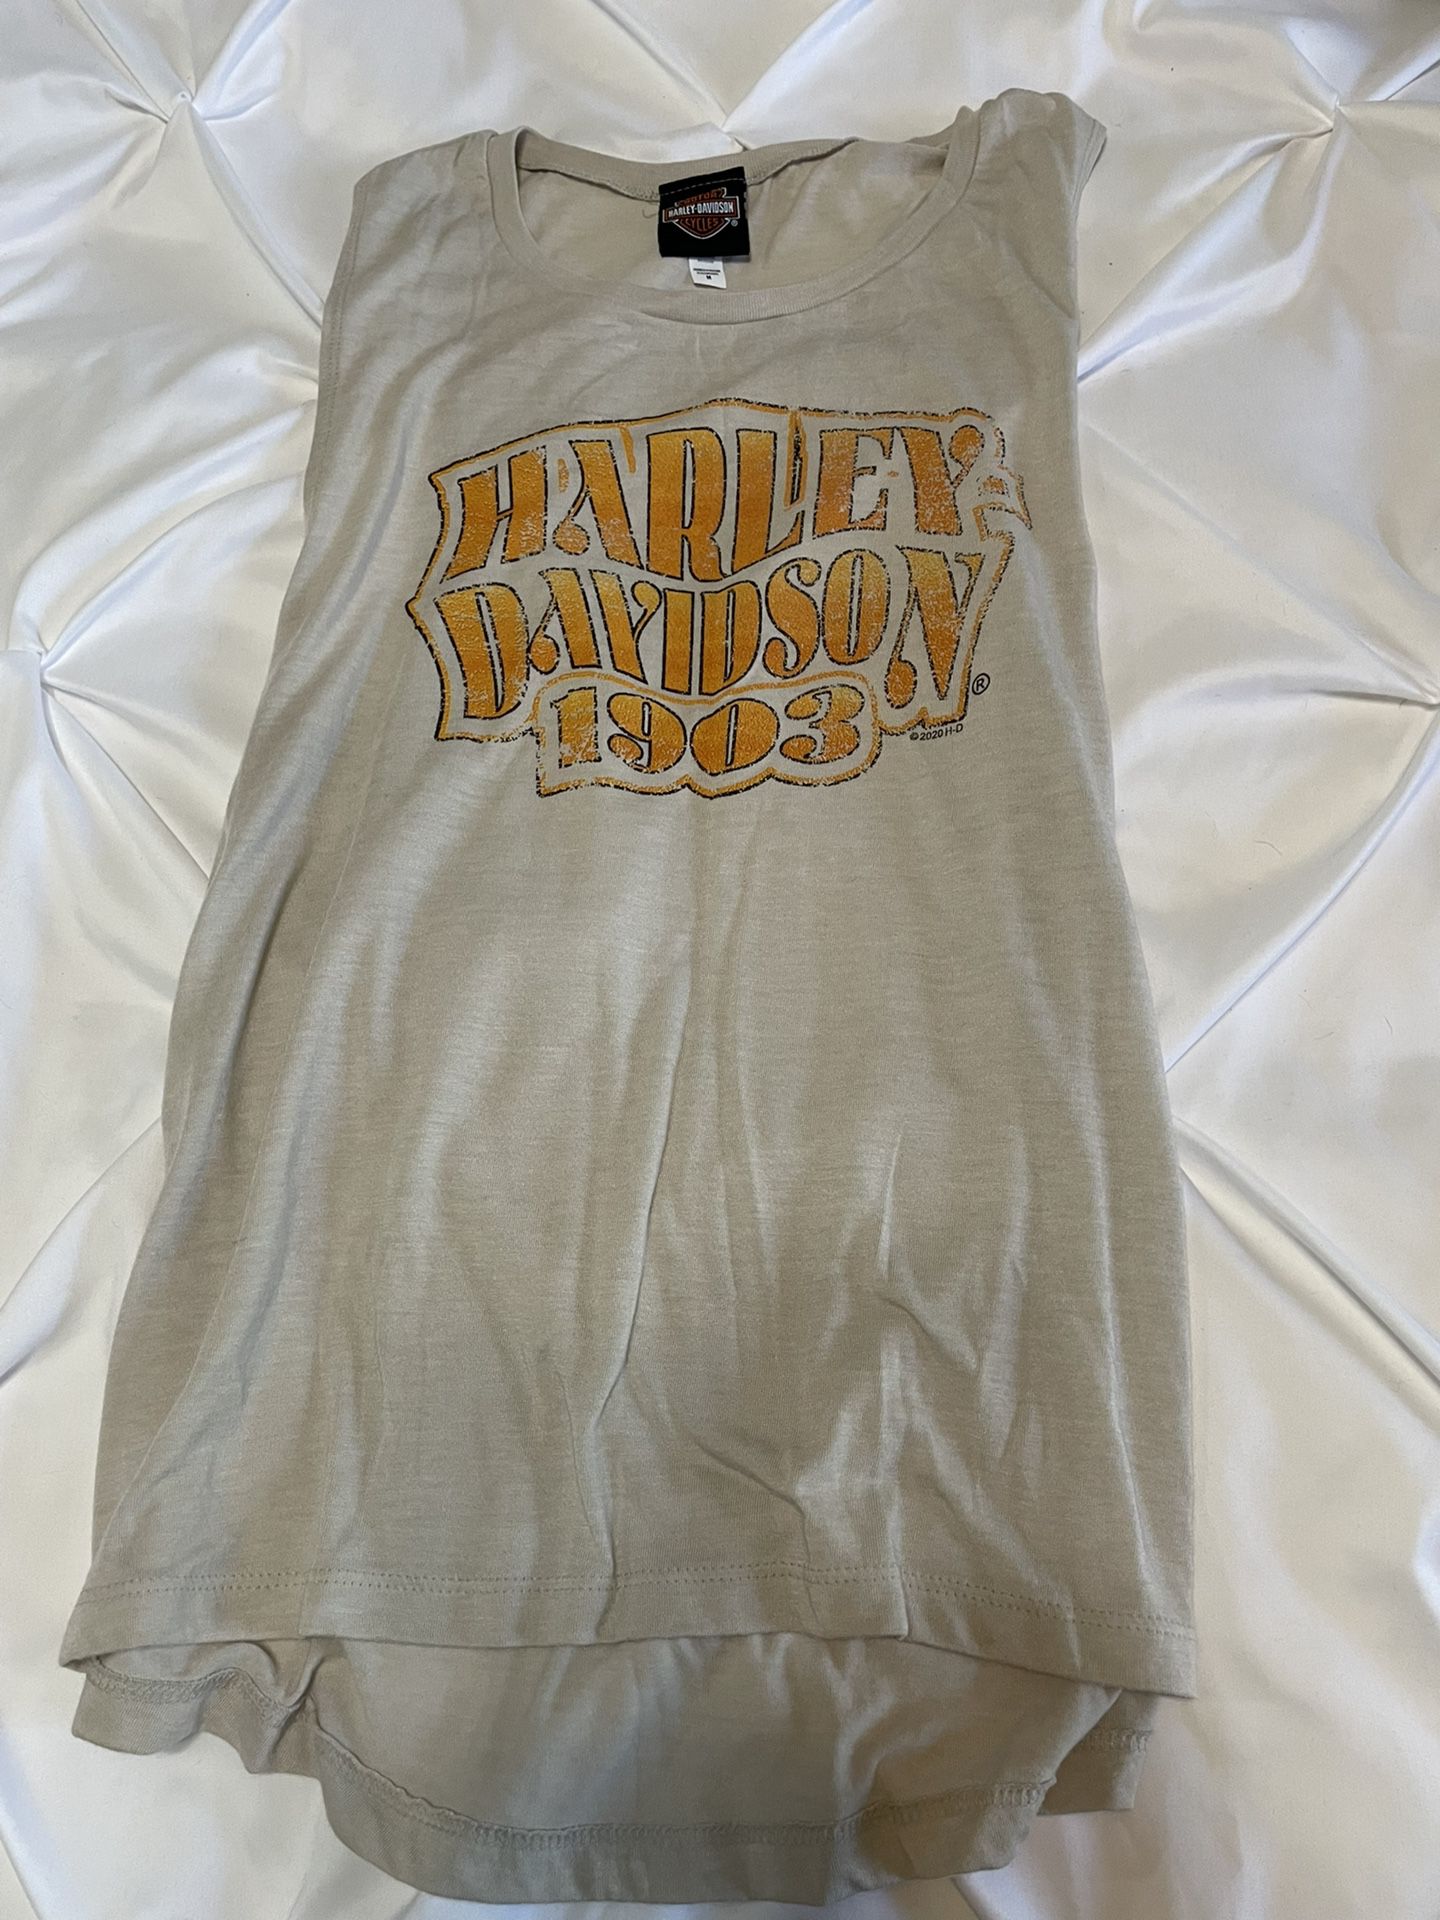 Lot Of Harley Davidson Women’s Tops And Accessories